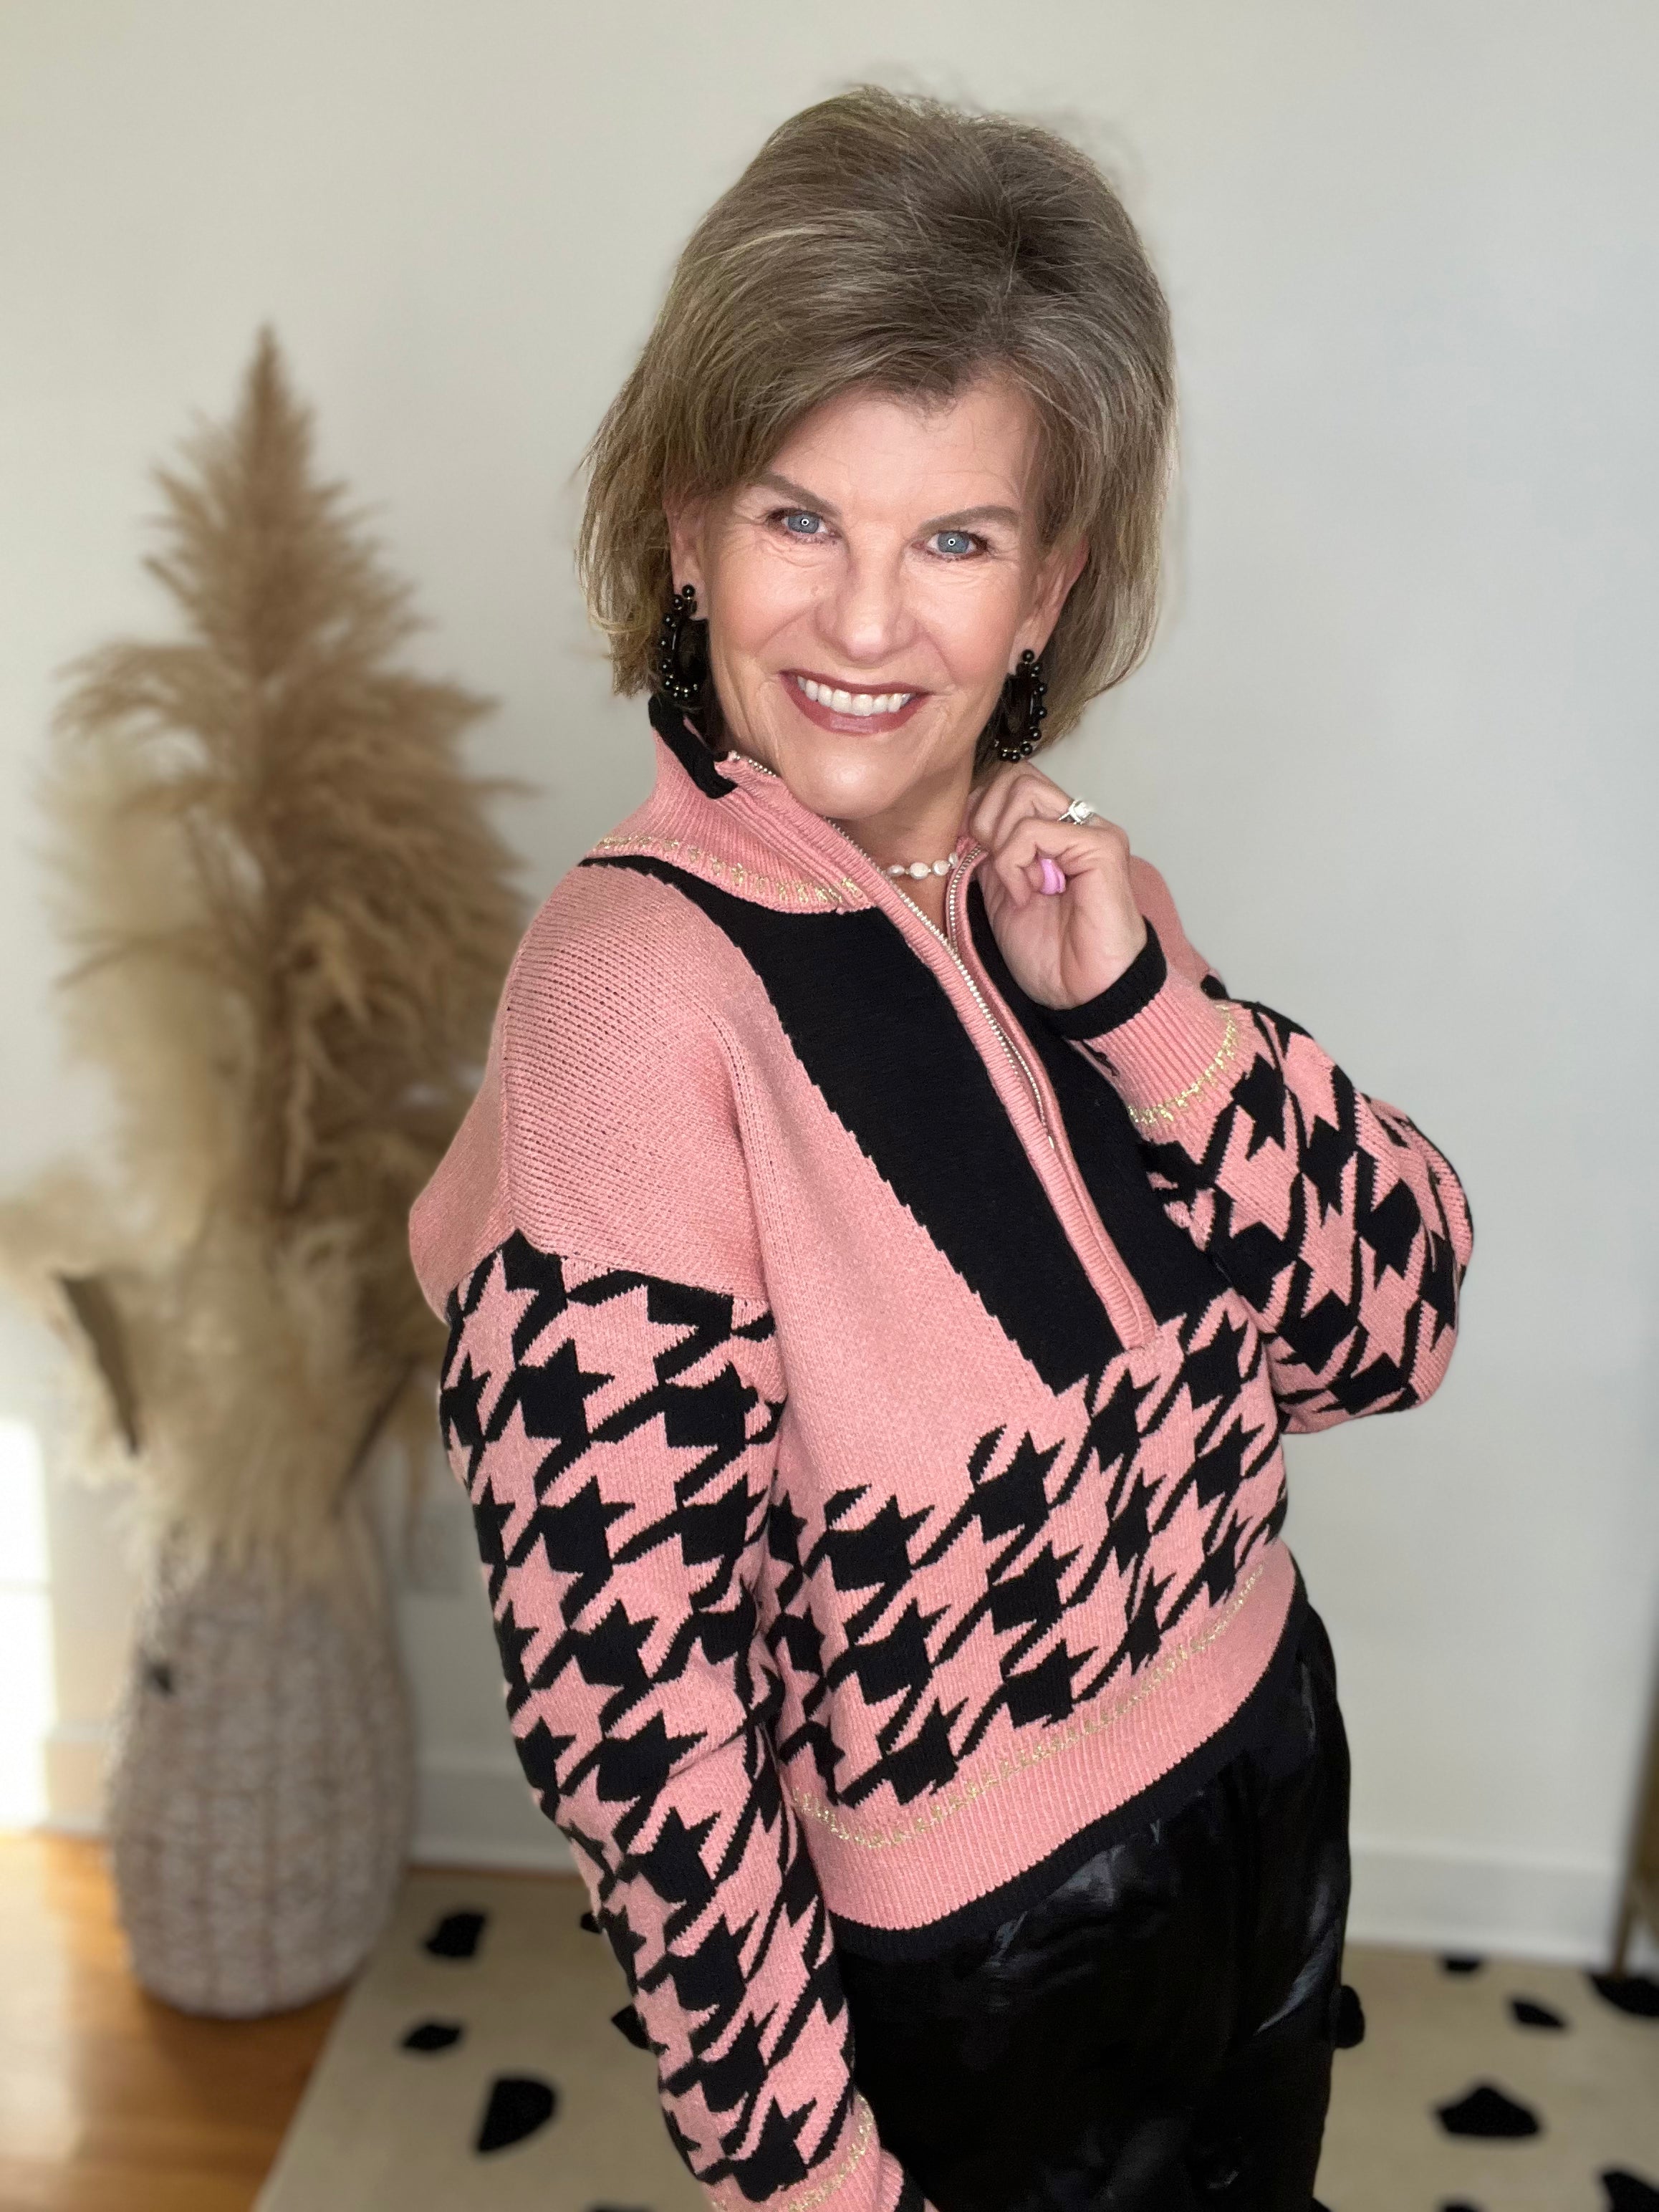 PINK AND BLACK HOUNDSTOOTH ZIP PULLOVER